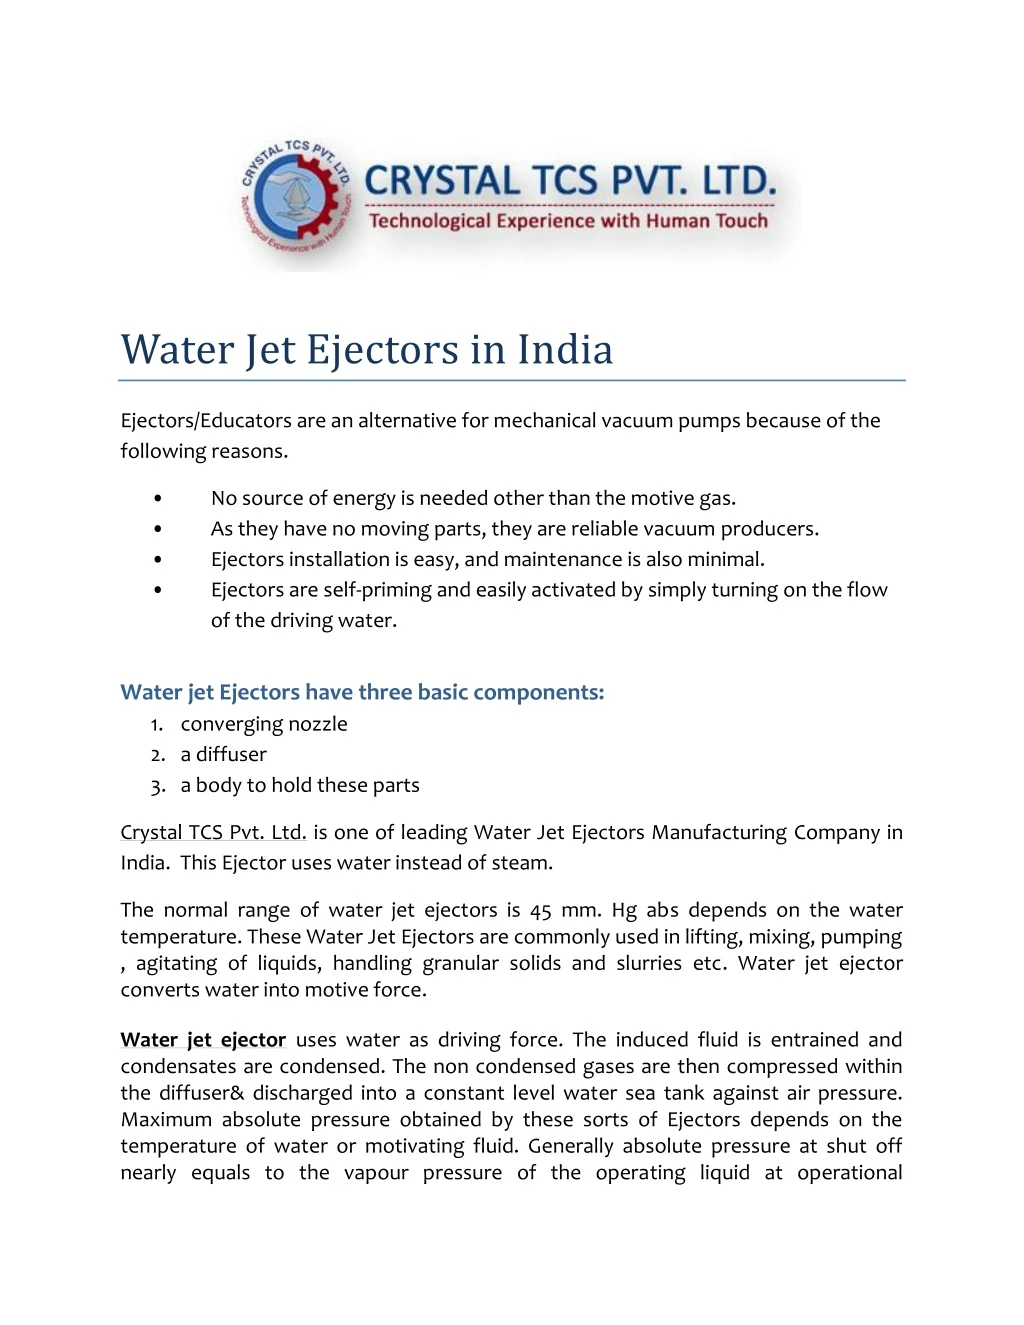 water jet ejectors in india